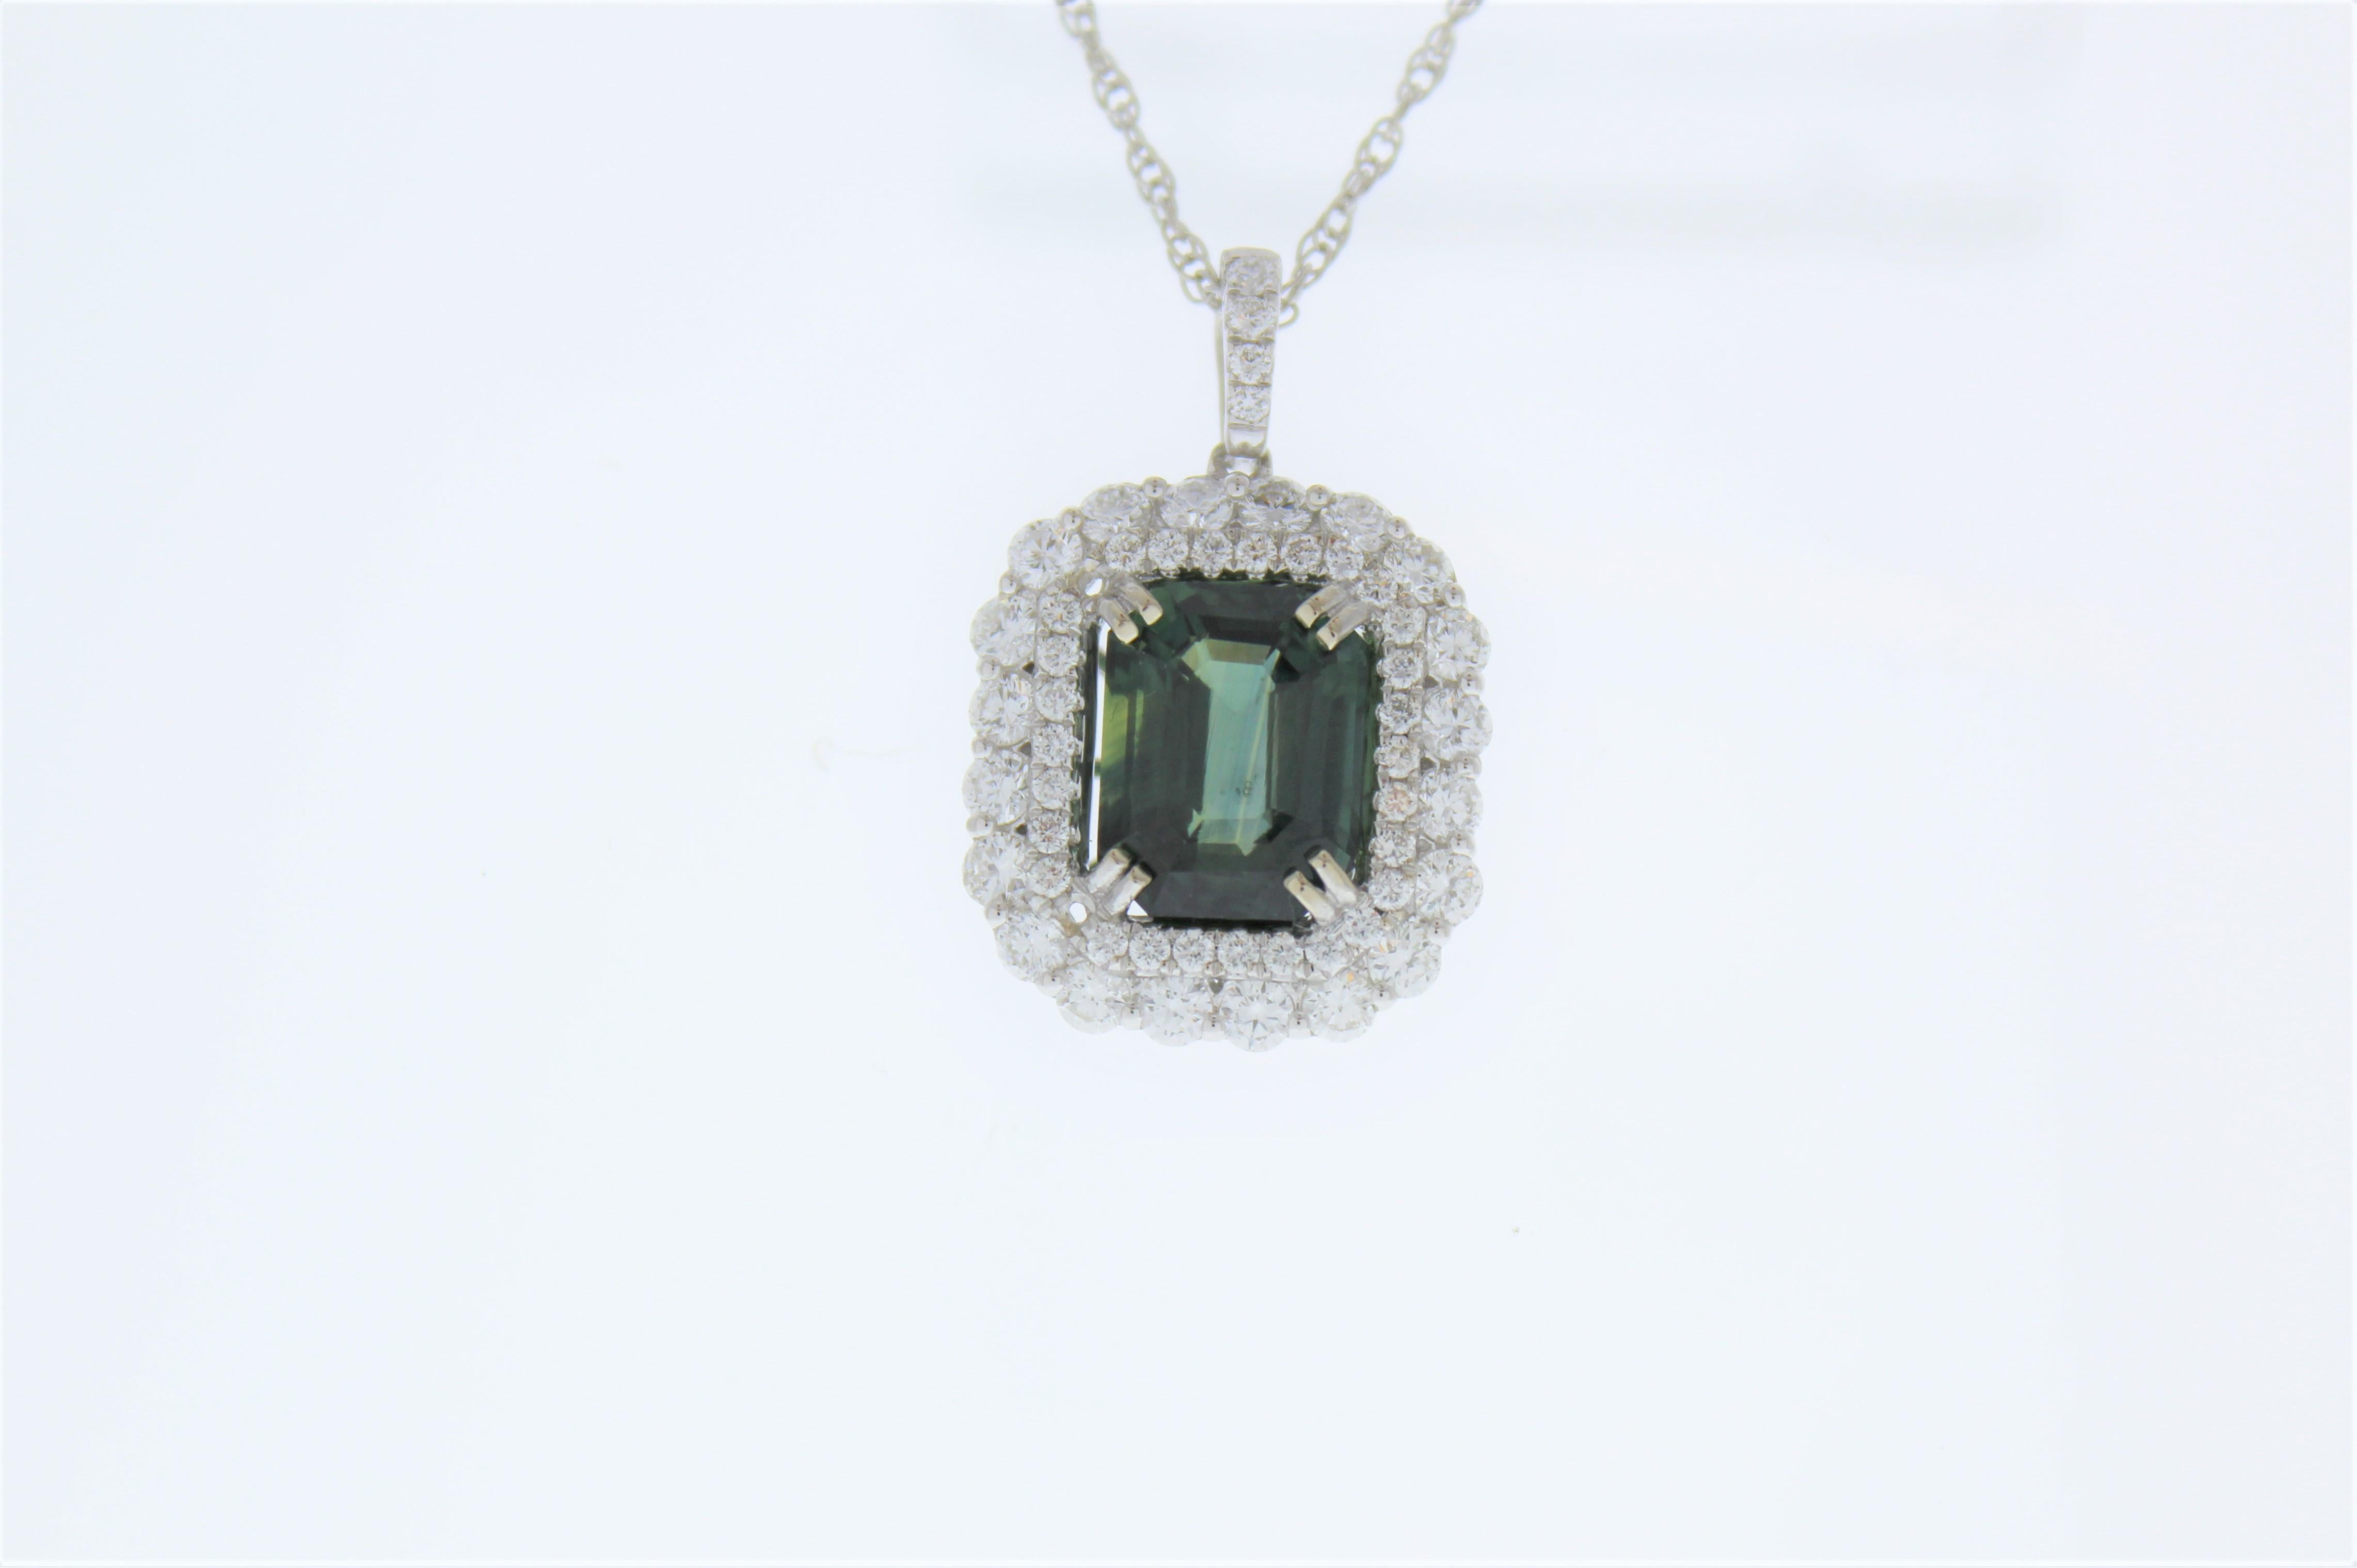 Finish your look with a touch of elegance wearing this gorgeous pendant. One 5.45 carat emerald cut bluish-green sapphire takes center stage in rich white gold accented prongs and is surrounded by round brilliant cut diamonds that are also set on